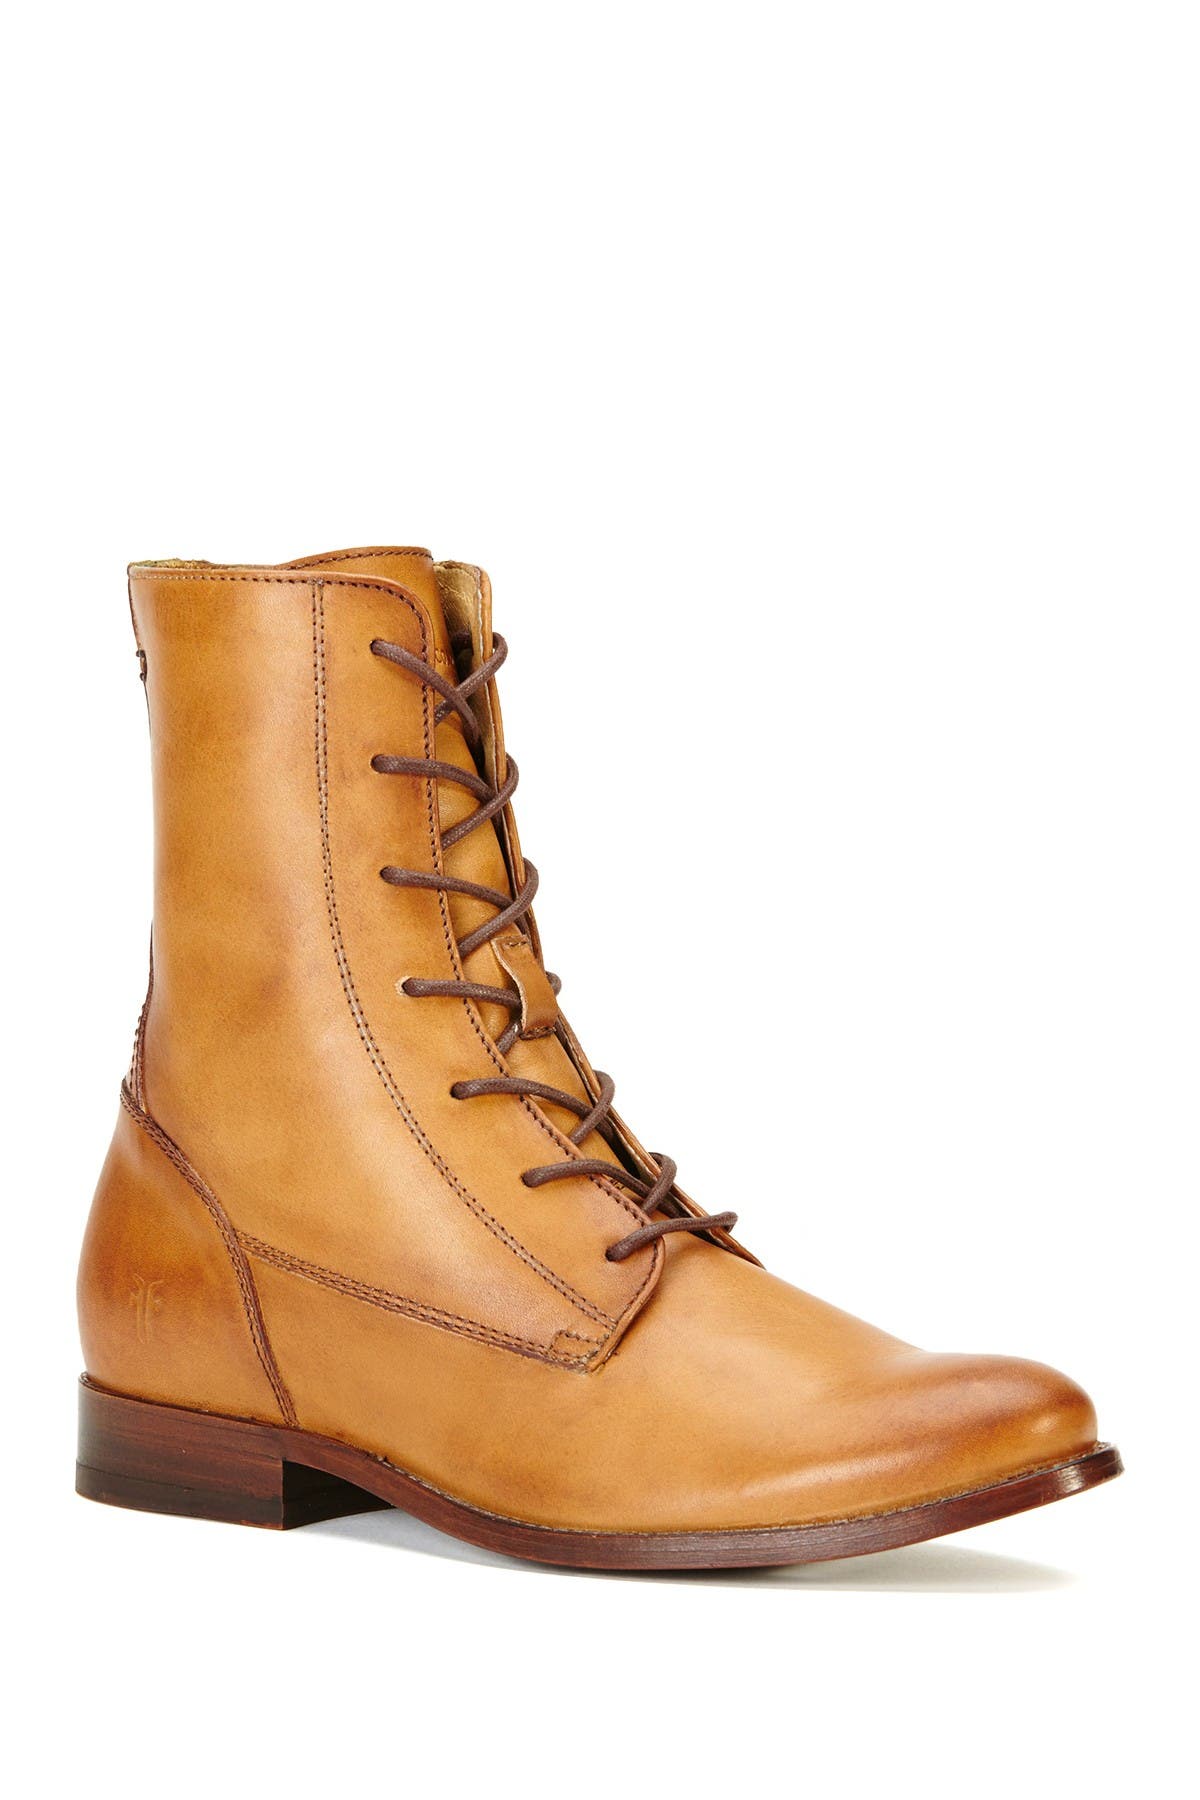 Frye | Melissa Lace-Up Boot | Nordstrom 